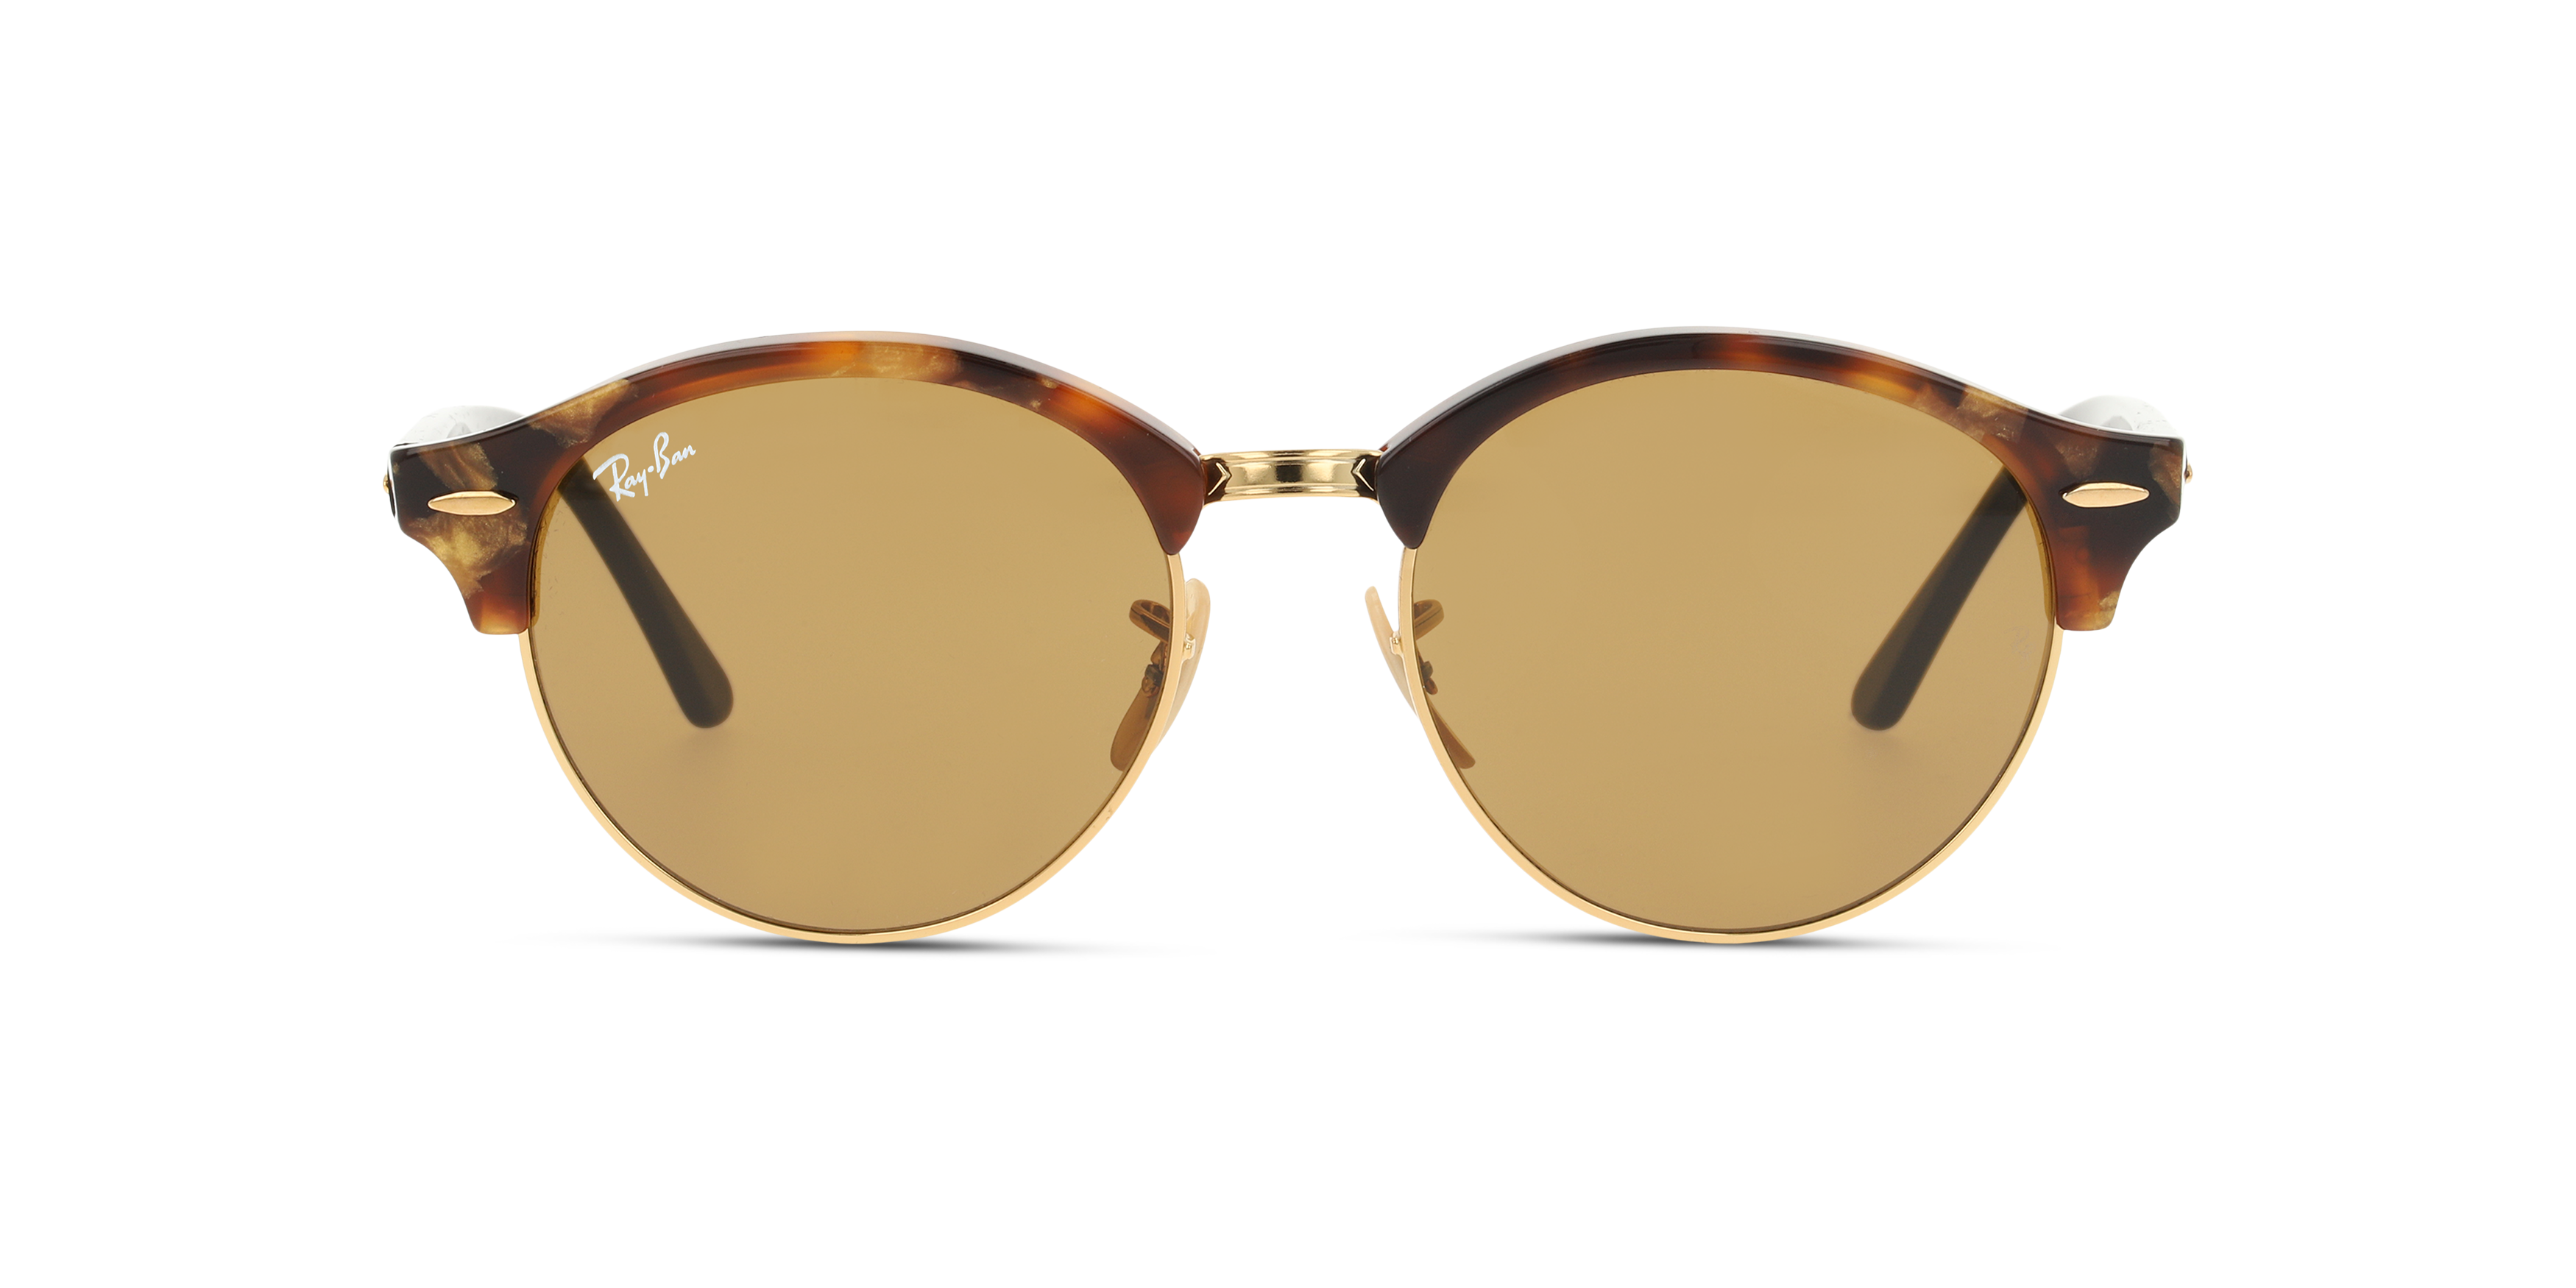 [products.image.front] RAY-BAN RB4246 1160